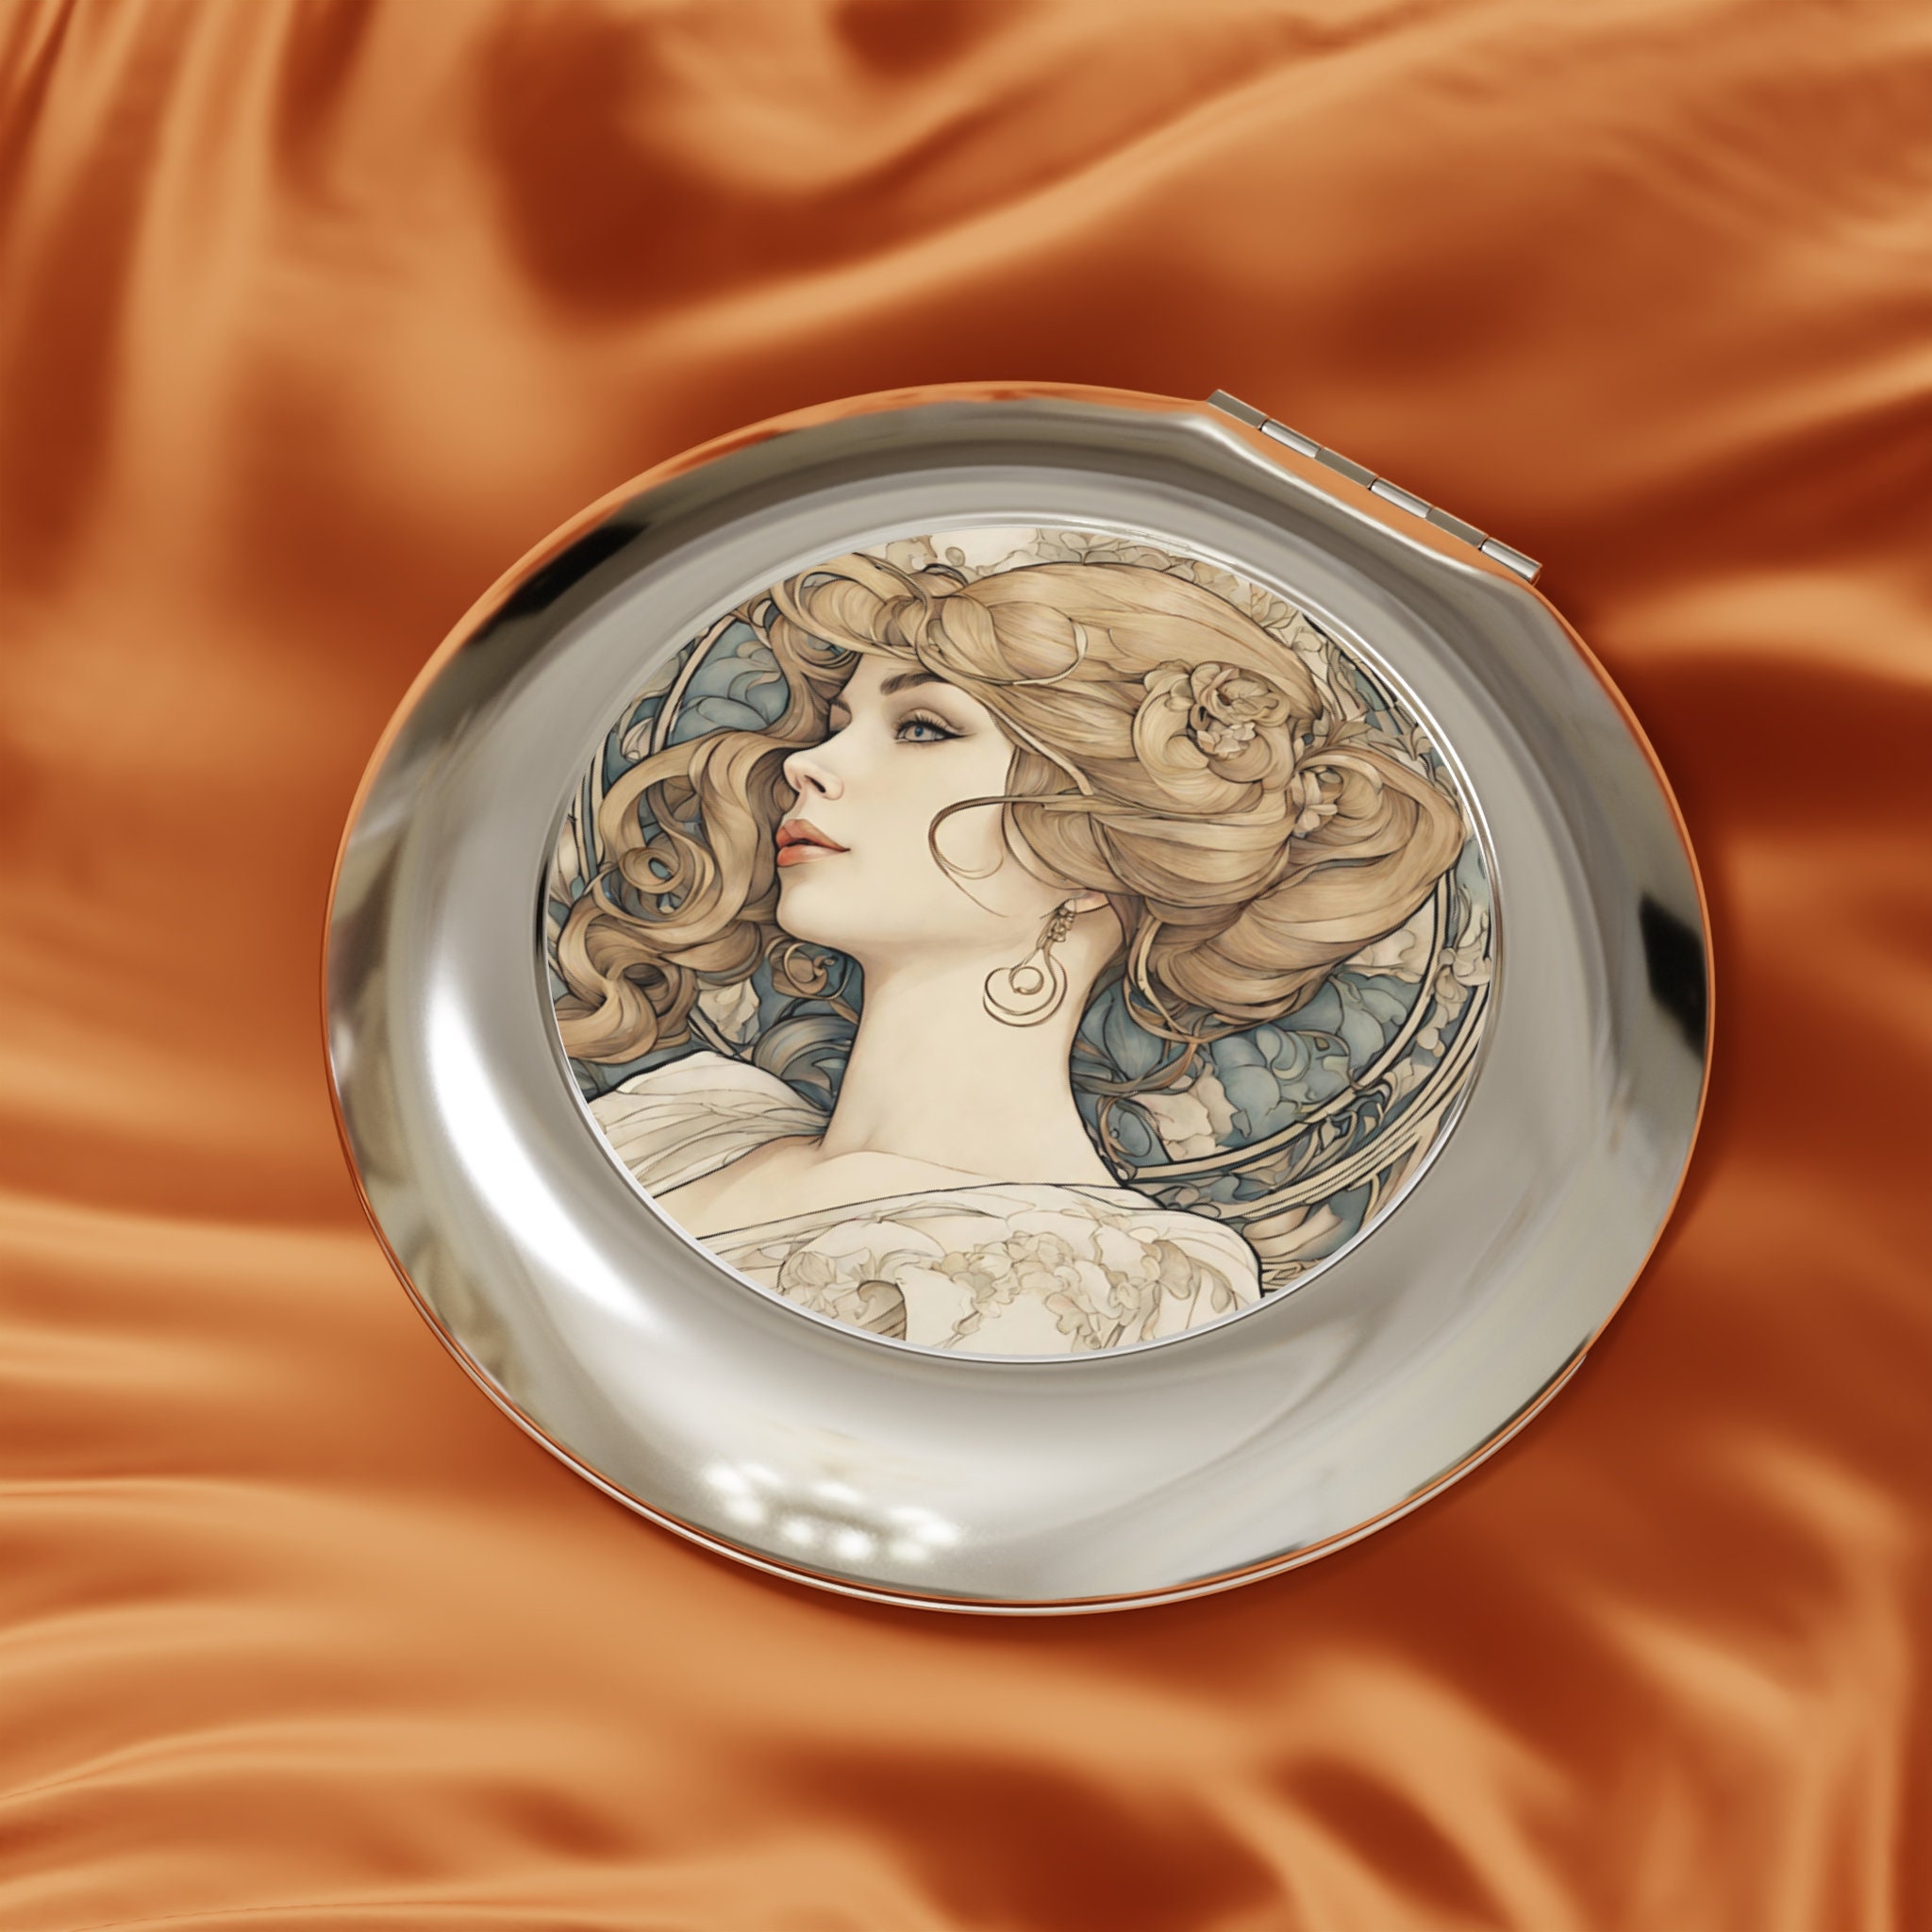 Discover My Golden Darling - Compact Travel Mirror, Birthday Gift, Travel Pocket Mirror